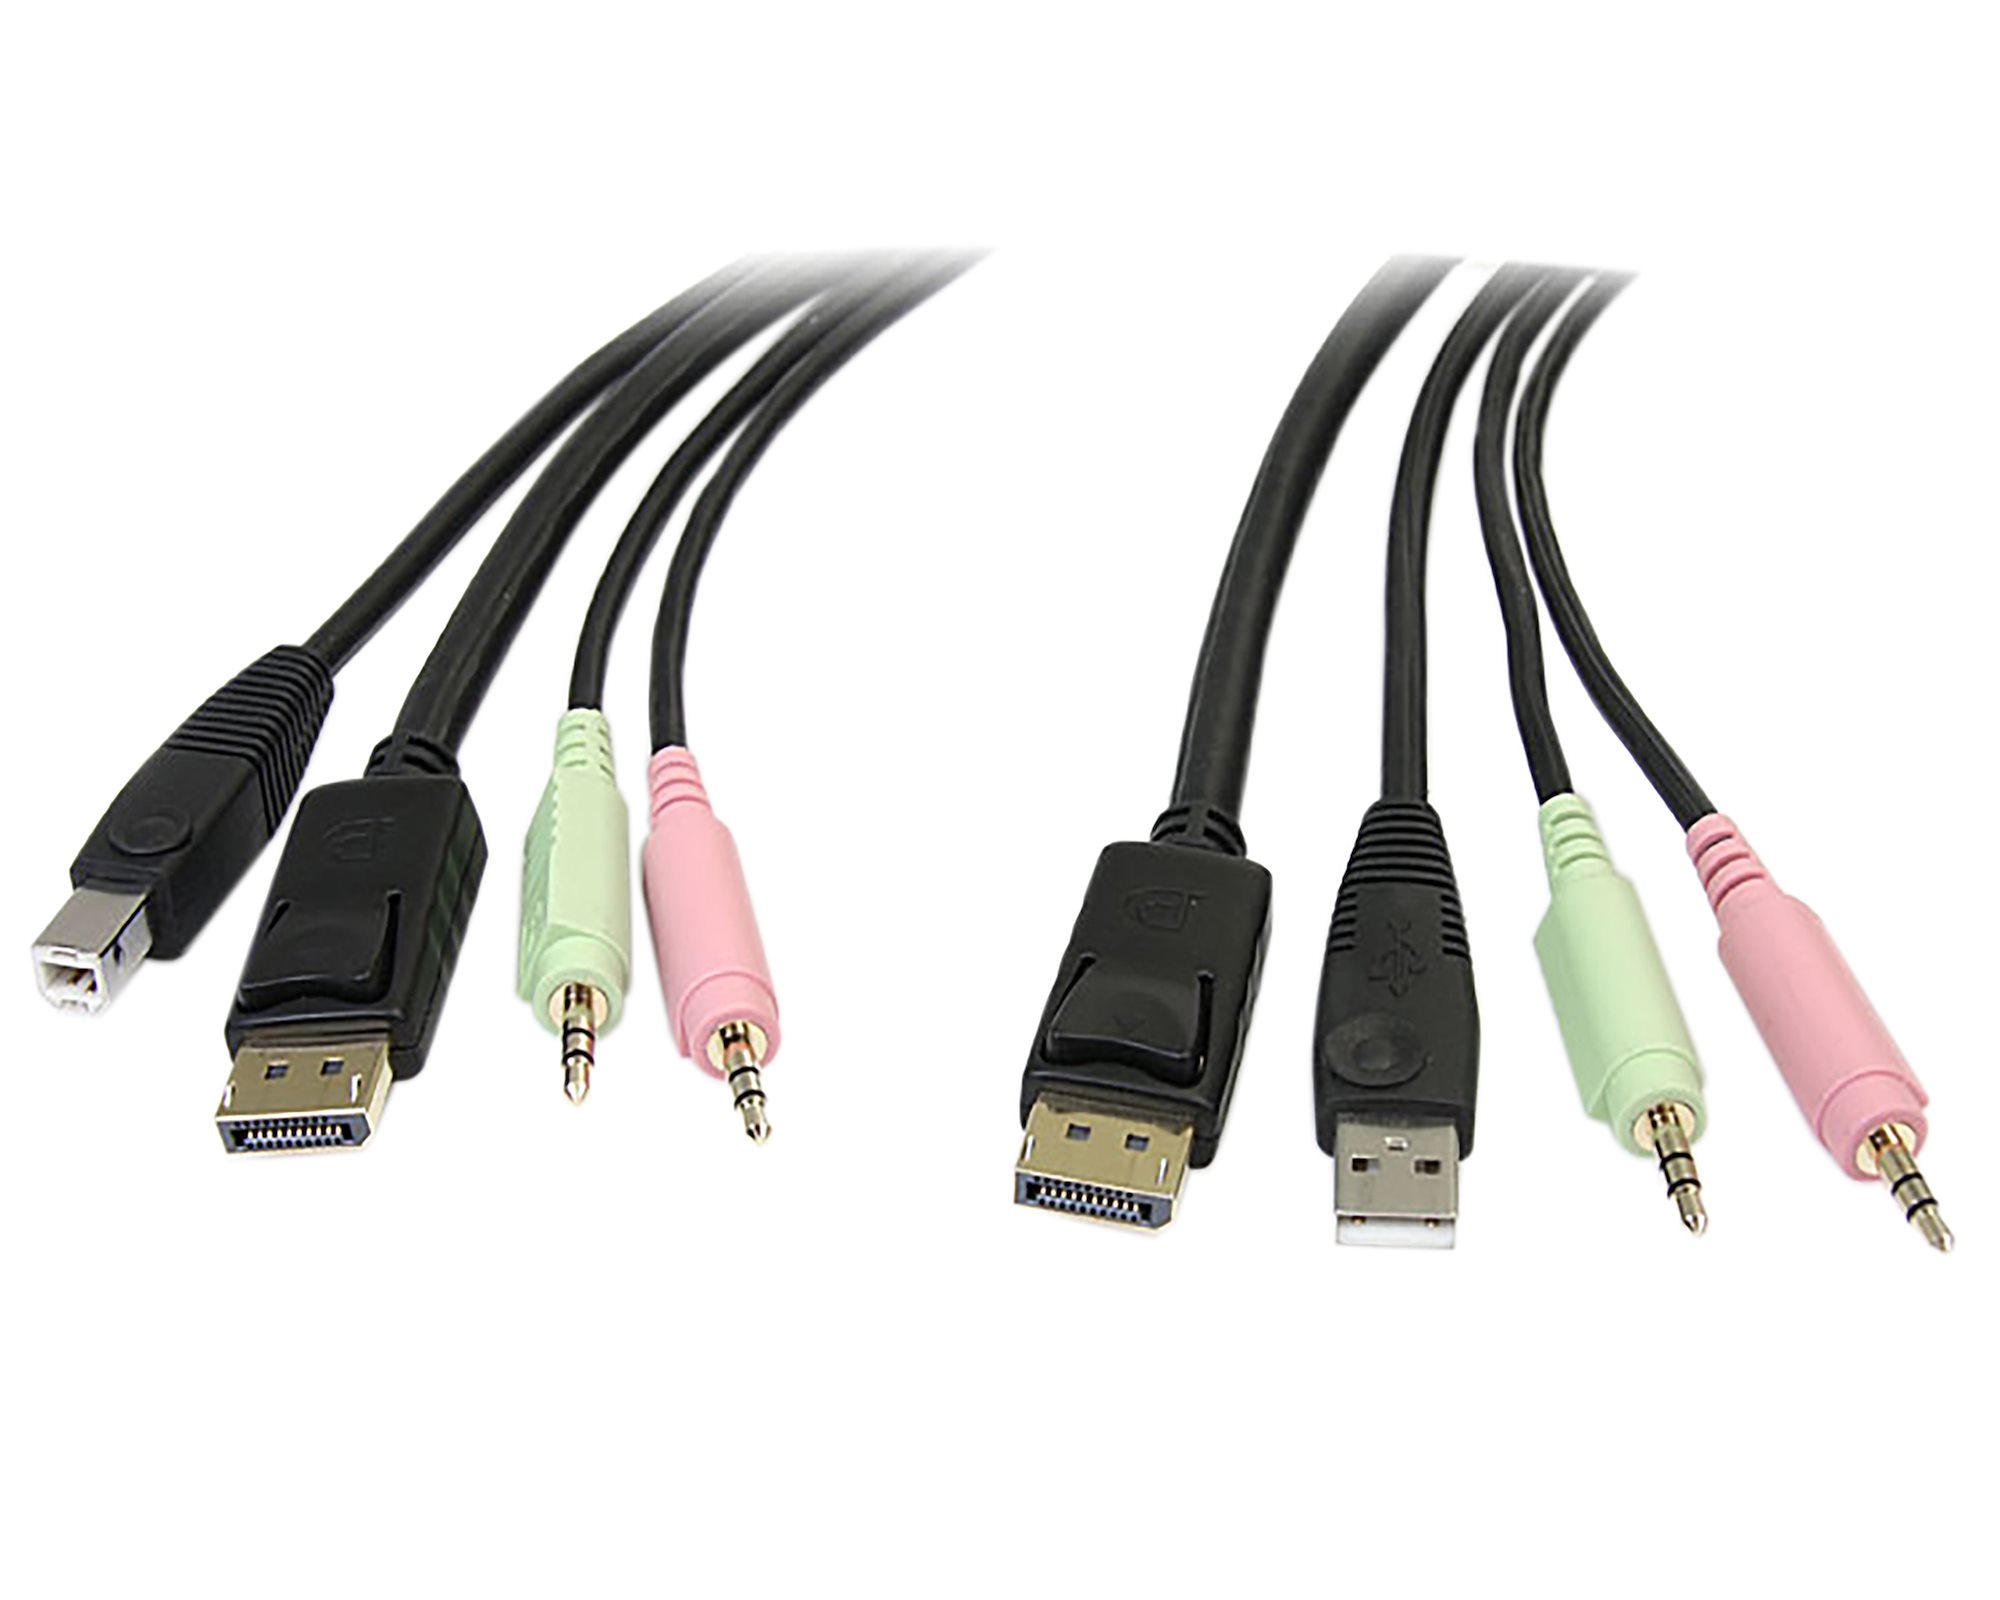 thespian Sidst vanter 4-in-1 USB DisplayPort KVM Switch Cable - KVM Cables | StarTech.com